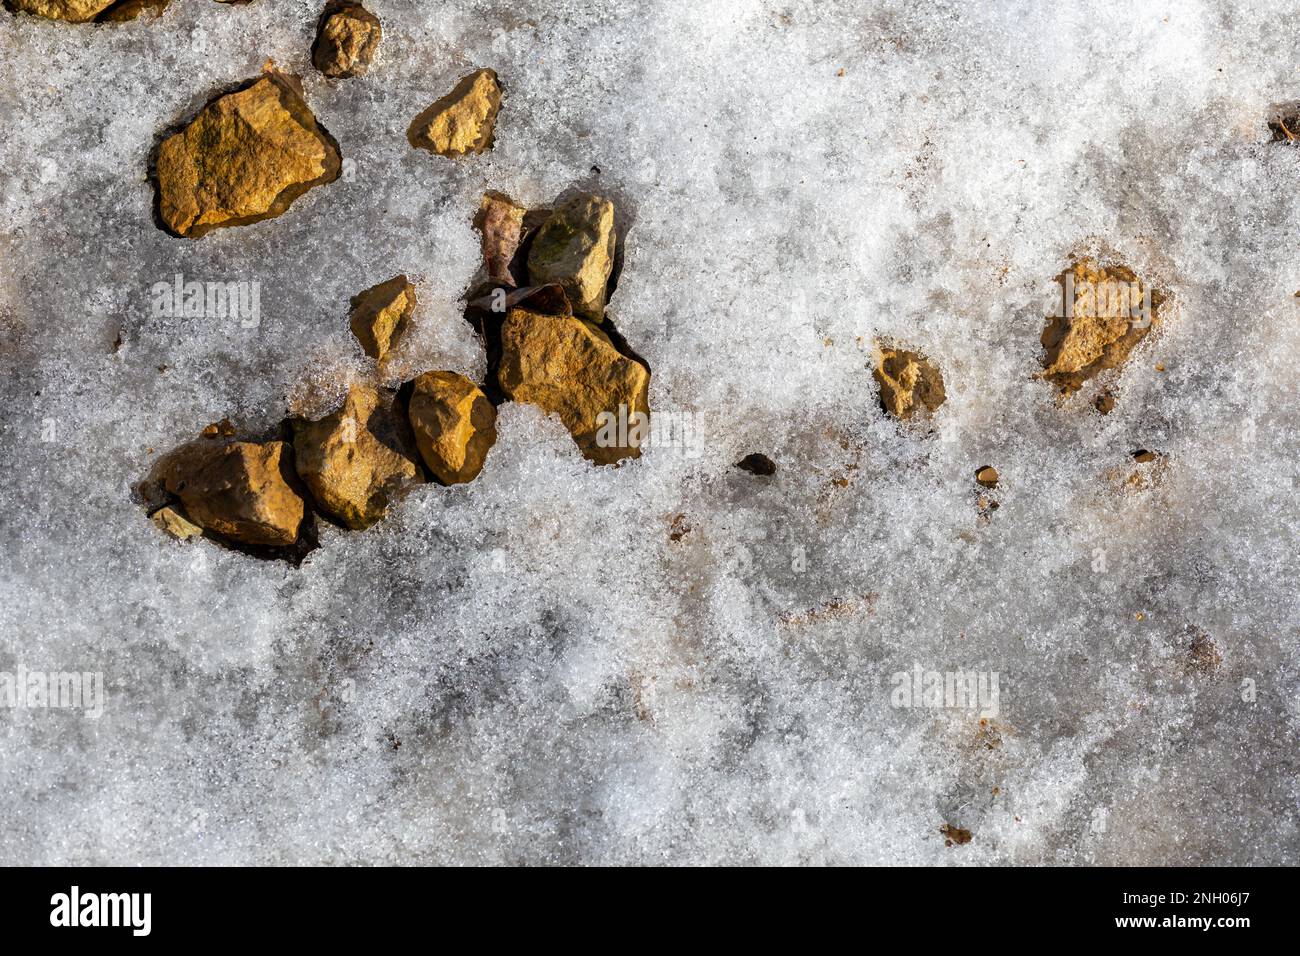 Full frame abstract texture background of snow beginning to melt under natural sunlight in late winter, exposing crushed rock under the surface Stock Photo